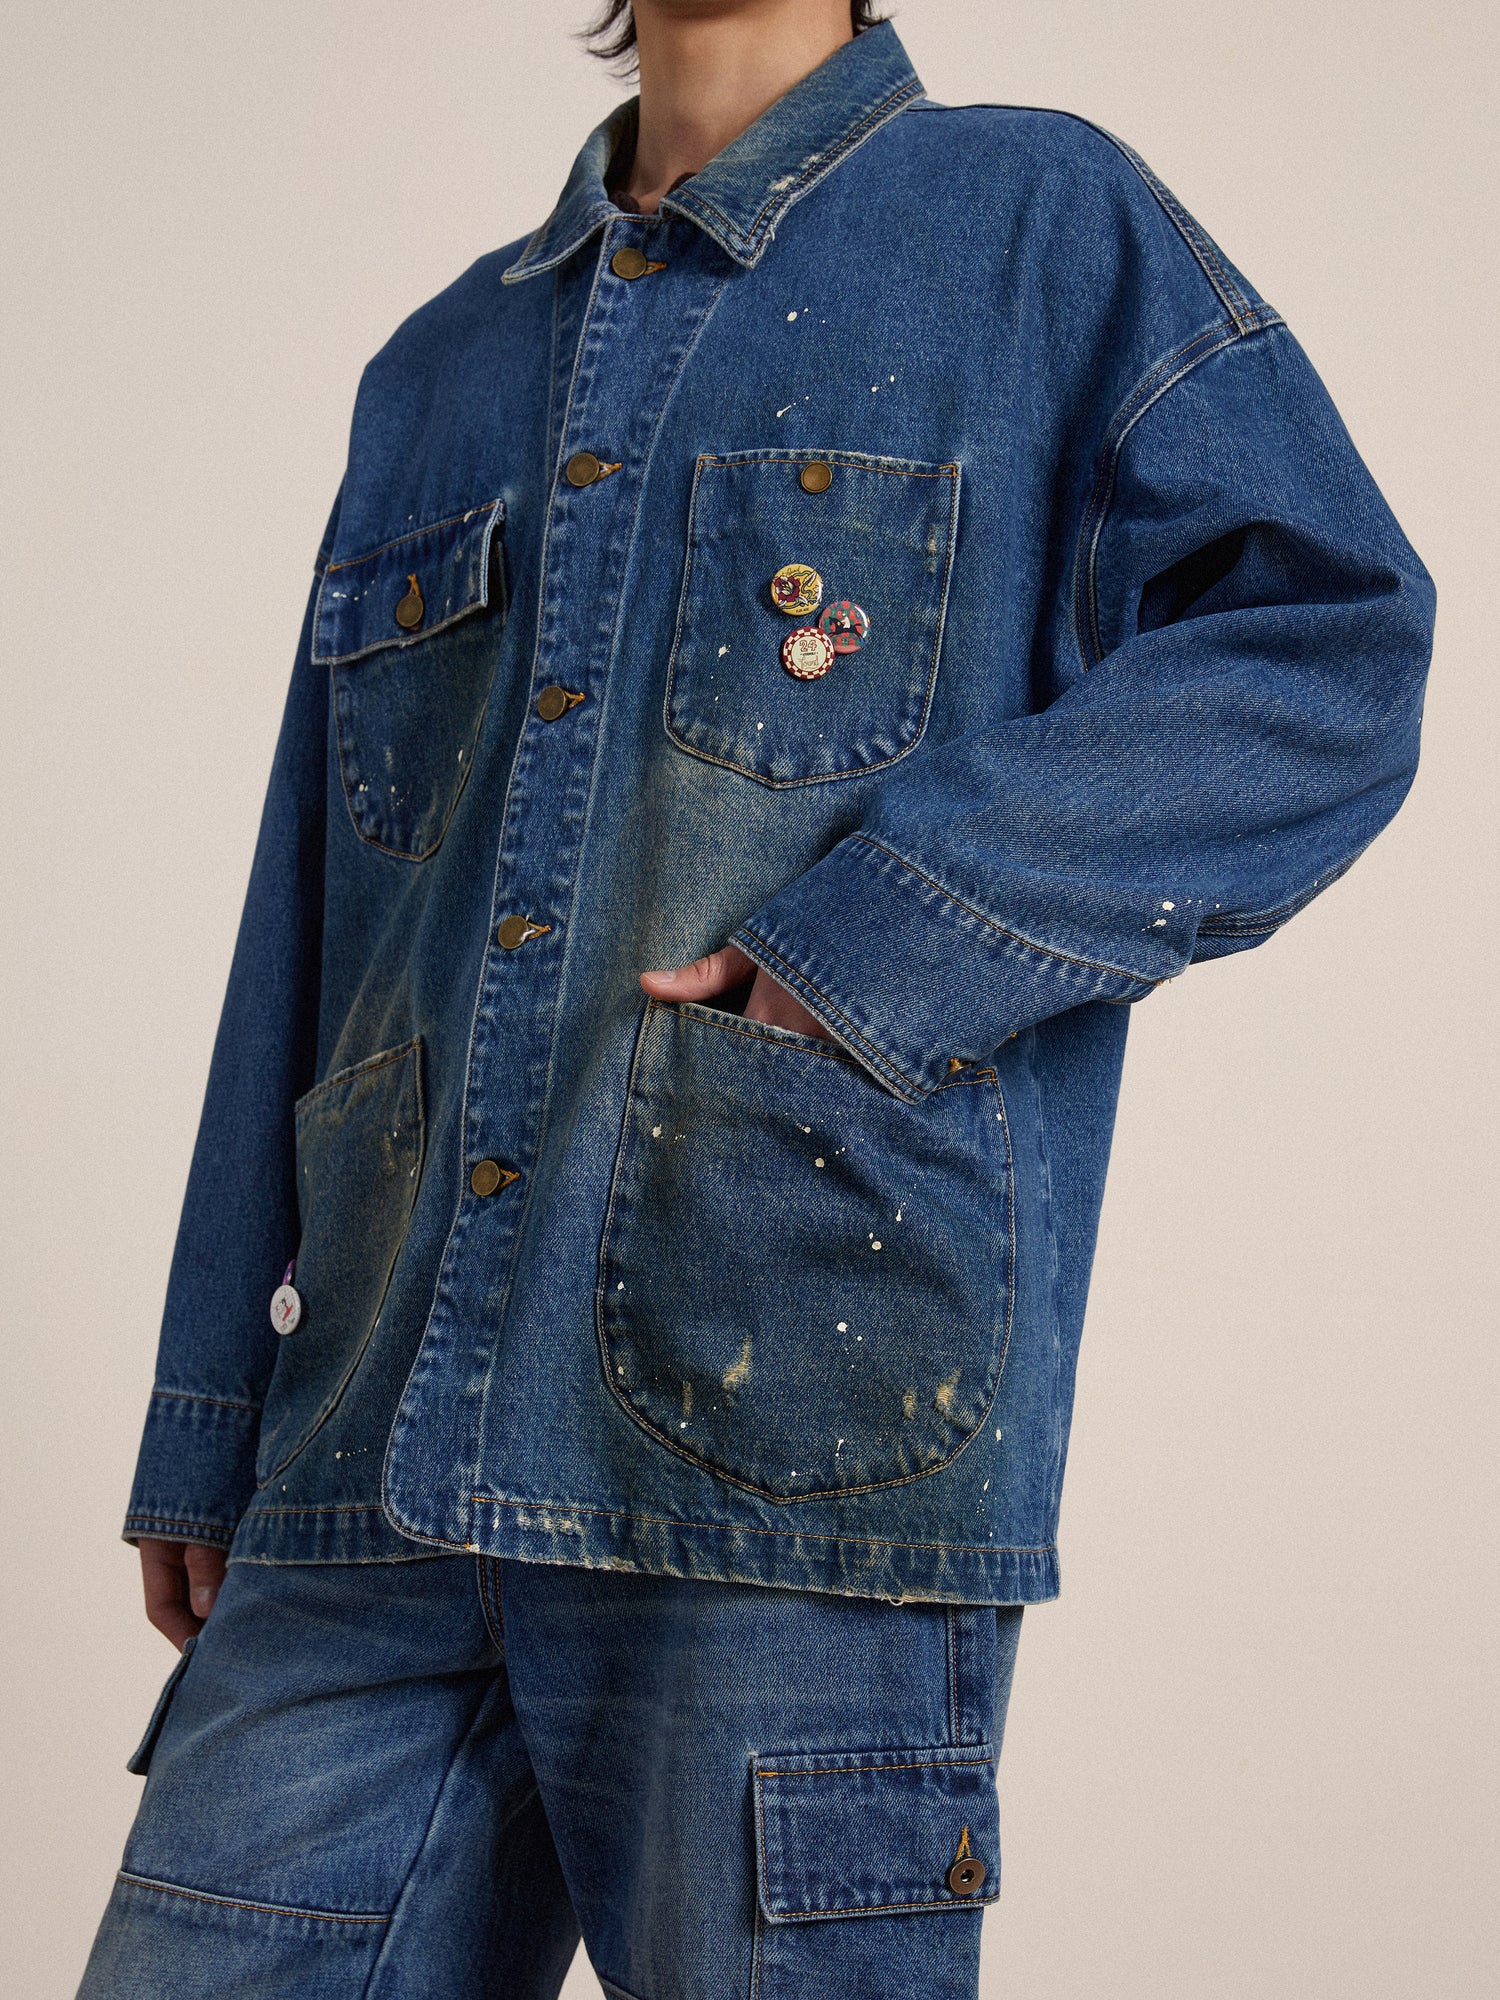 A model wearing a Kavir Denim Painter Jacket designed by Found with buttons.